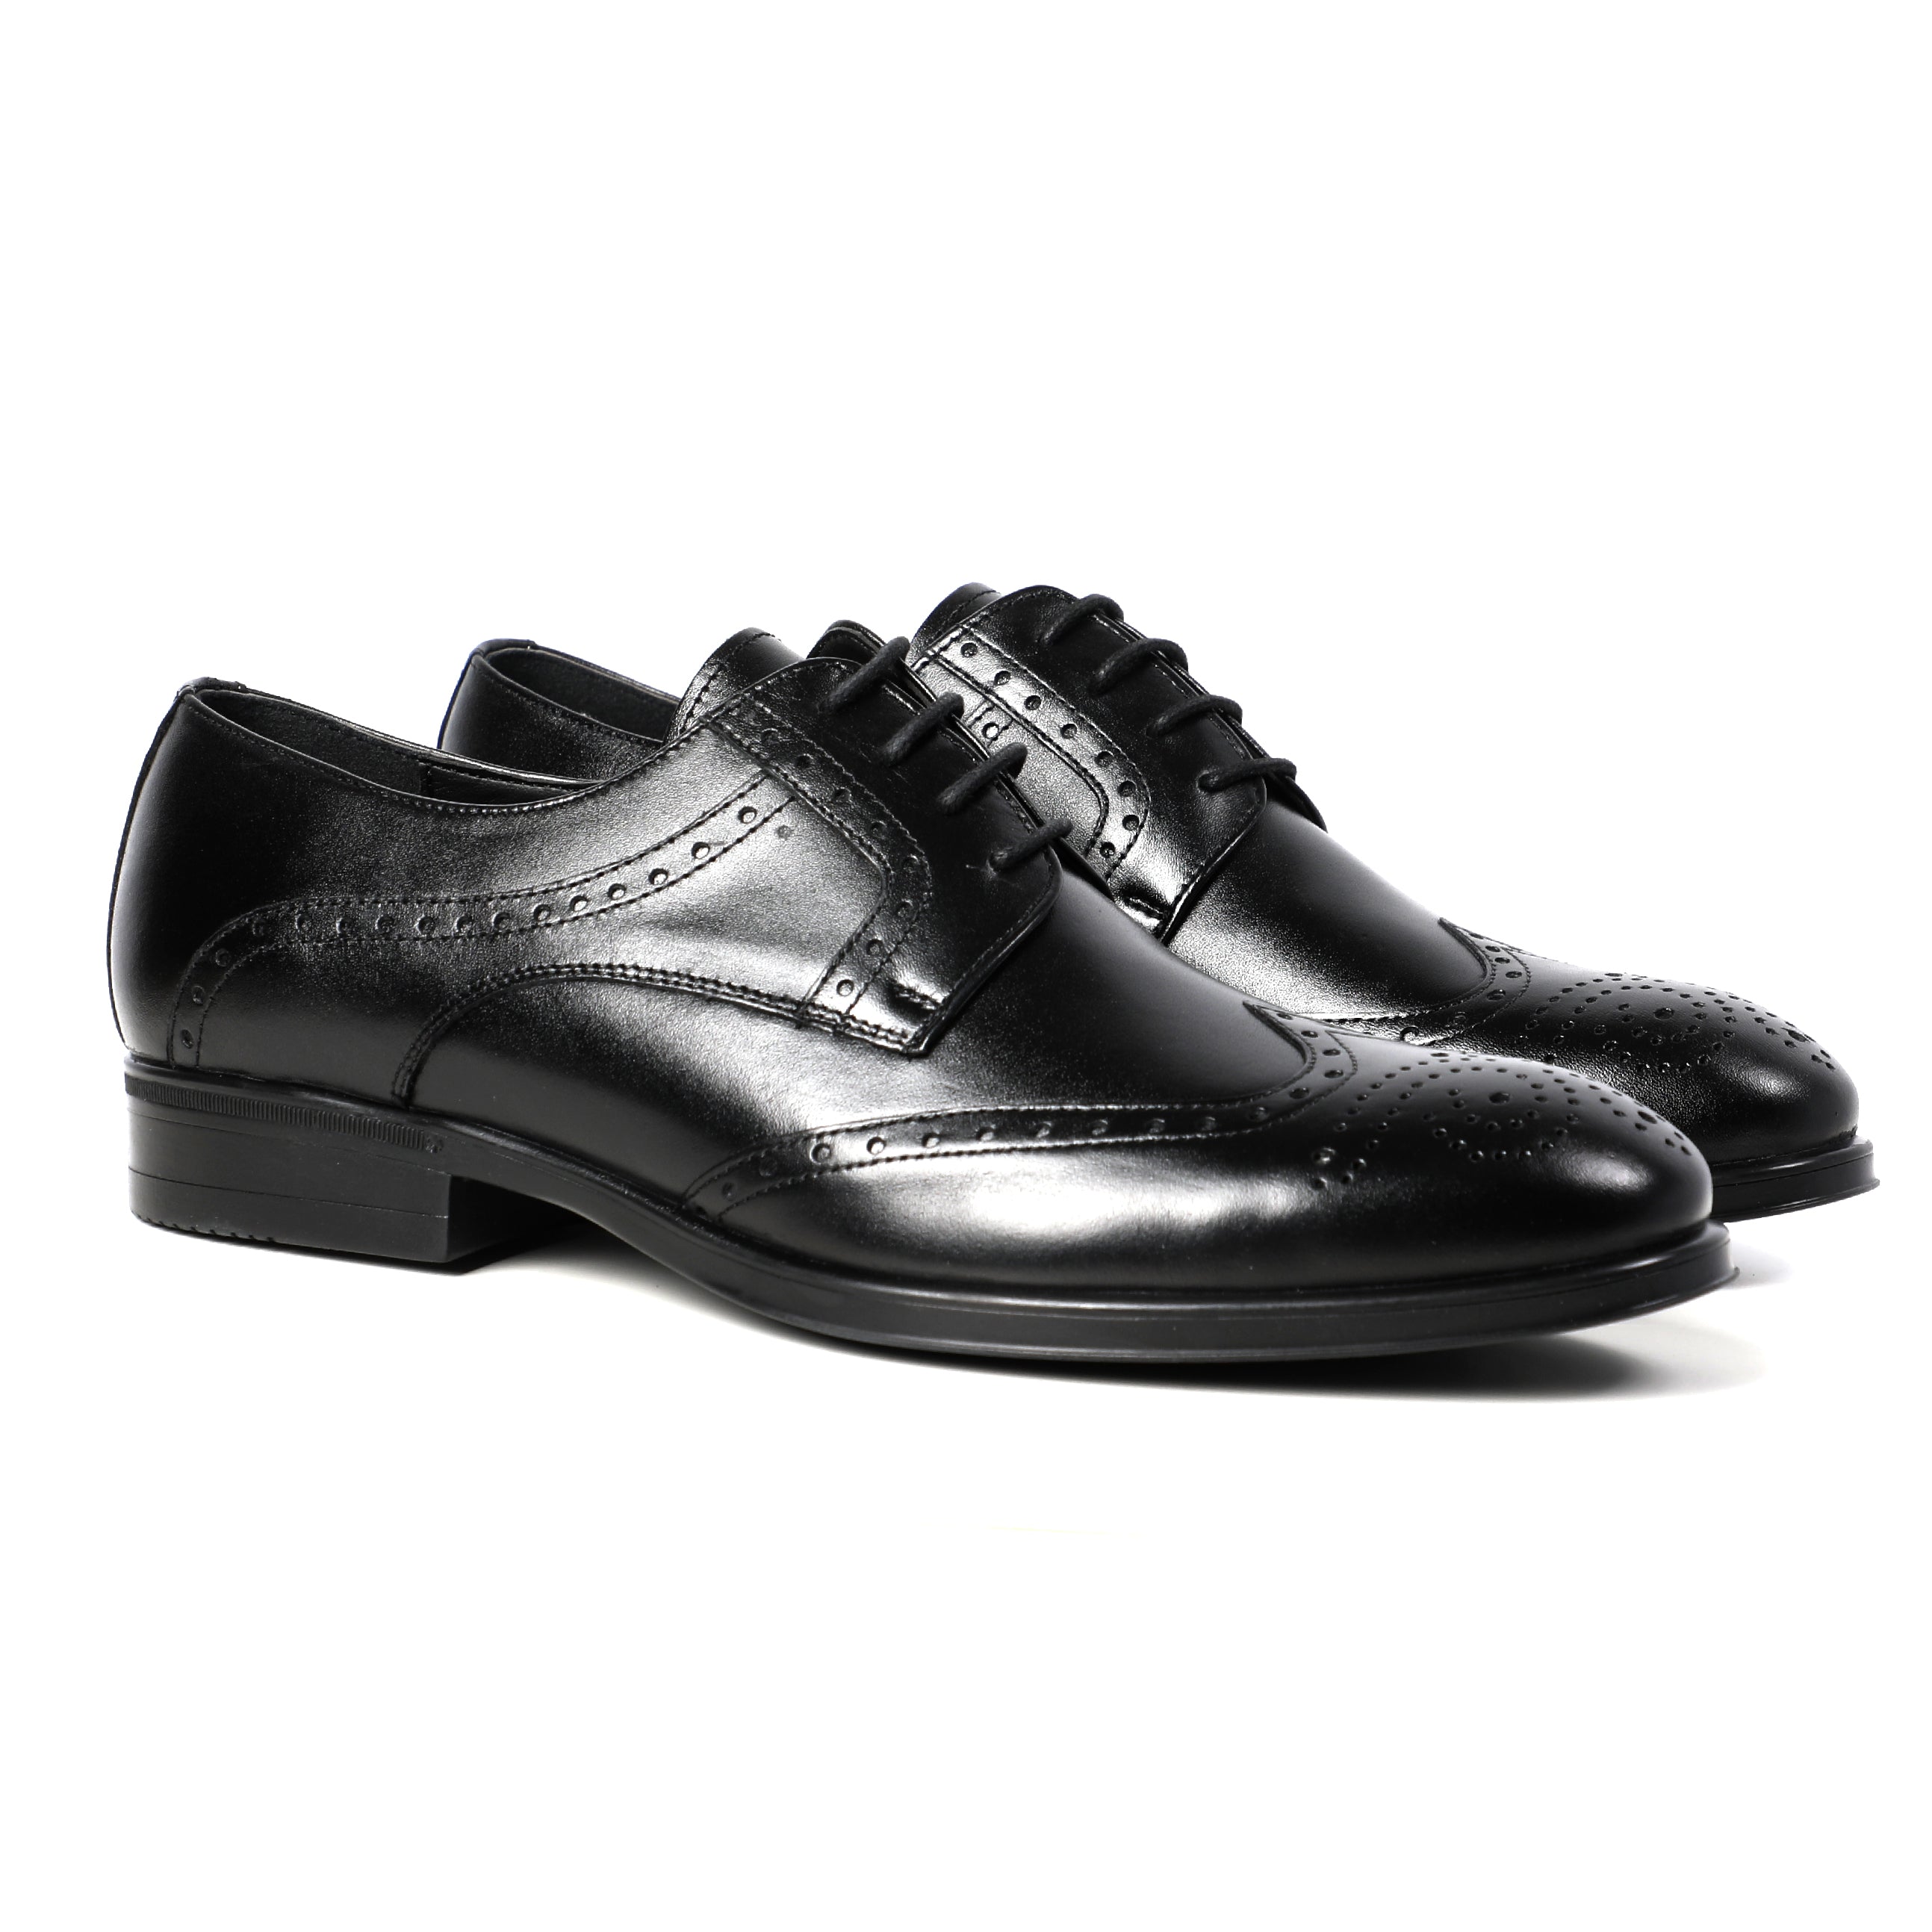 Men Handcrafted Black Classic Shoes